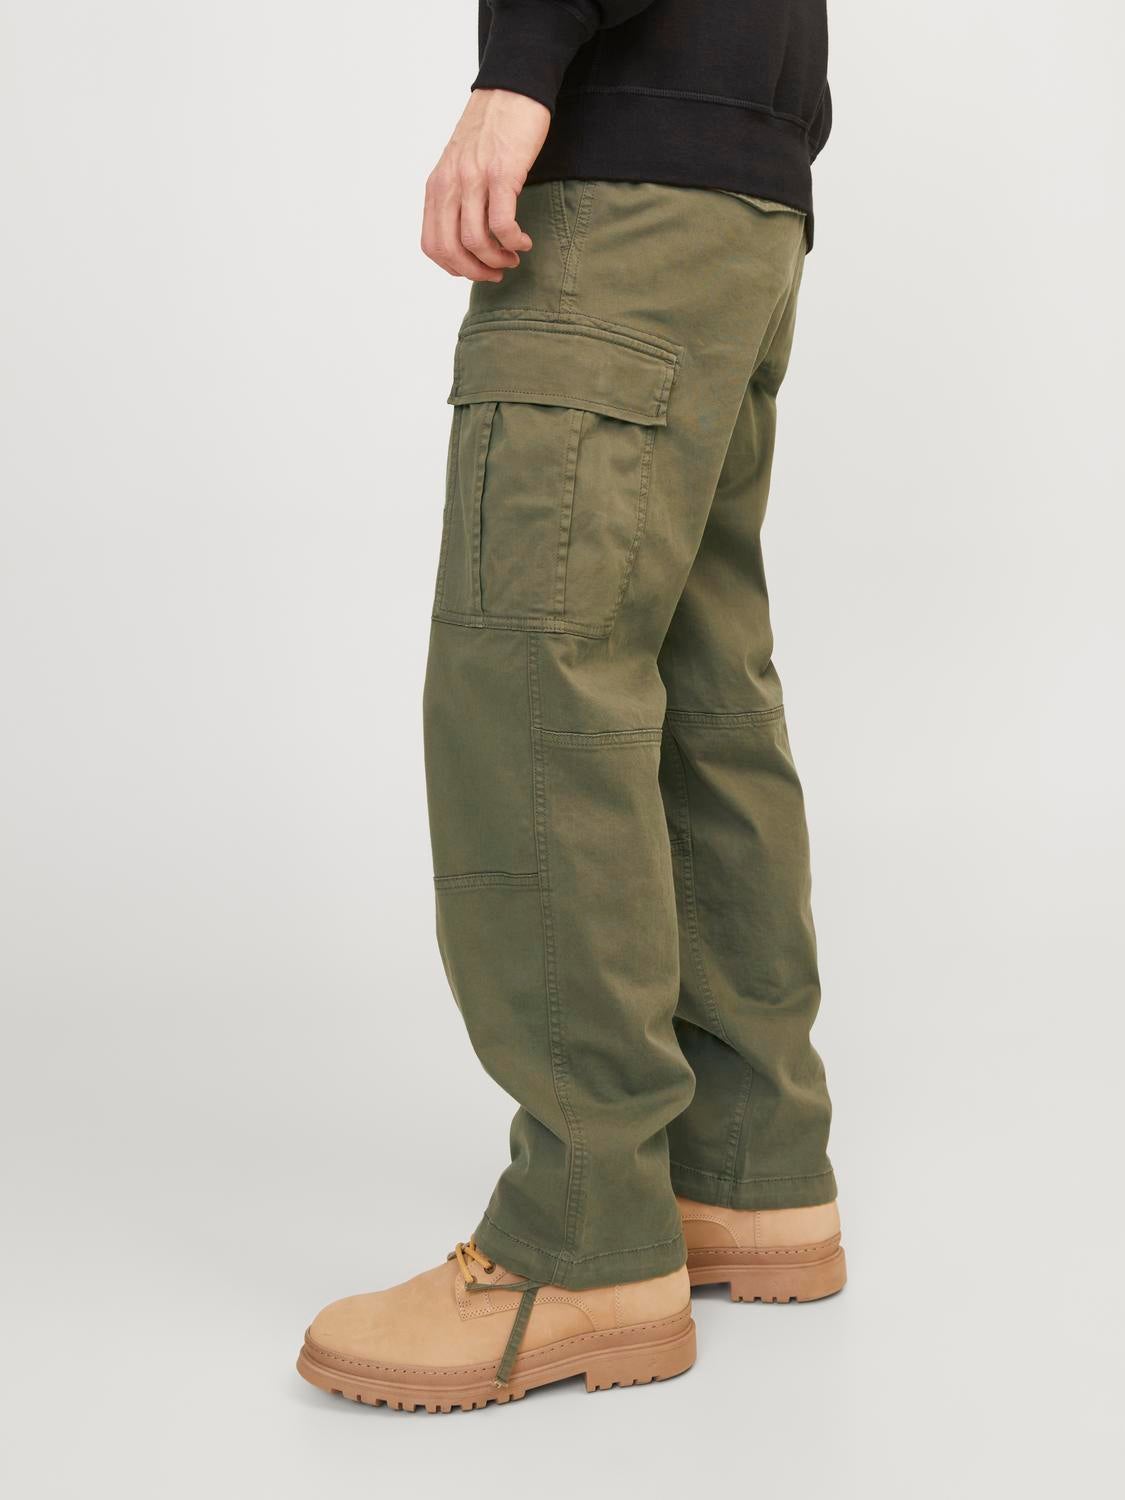 Mens Tactical Quick Dry Cargo Pants Waterproof Outdoor Work Army Trousers  Mens For Camping, Trekking, Mountain Hiking, And Military Use 210715 From  Bai03, $20.45 | DHgate.Com